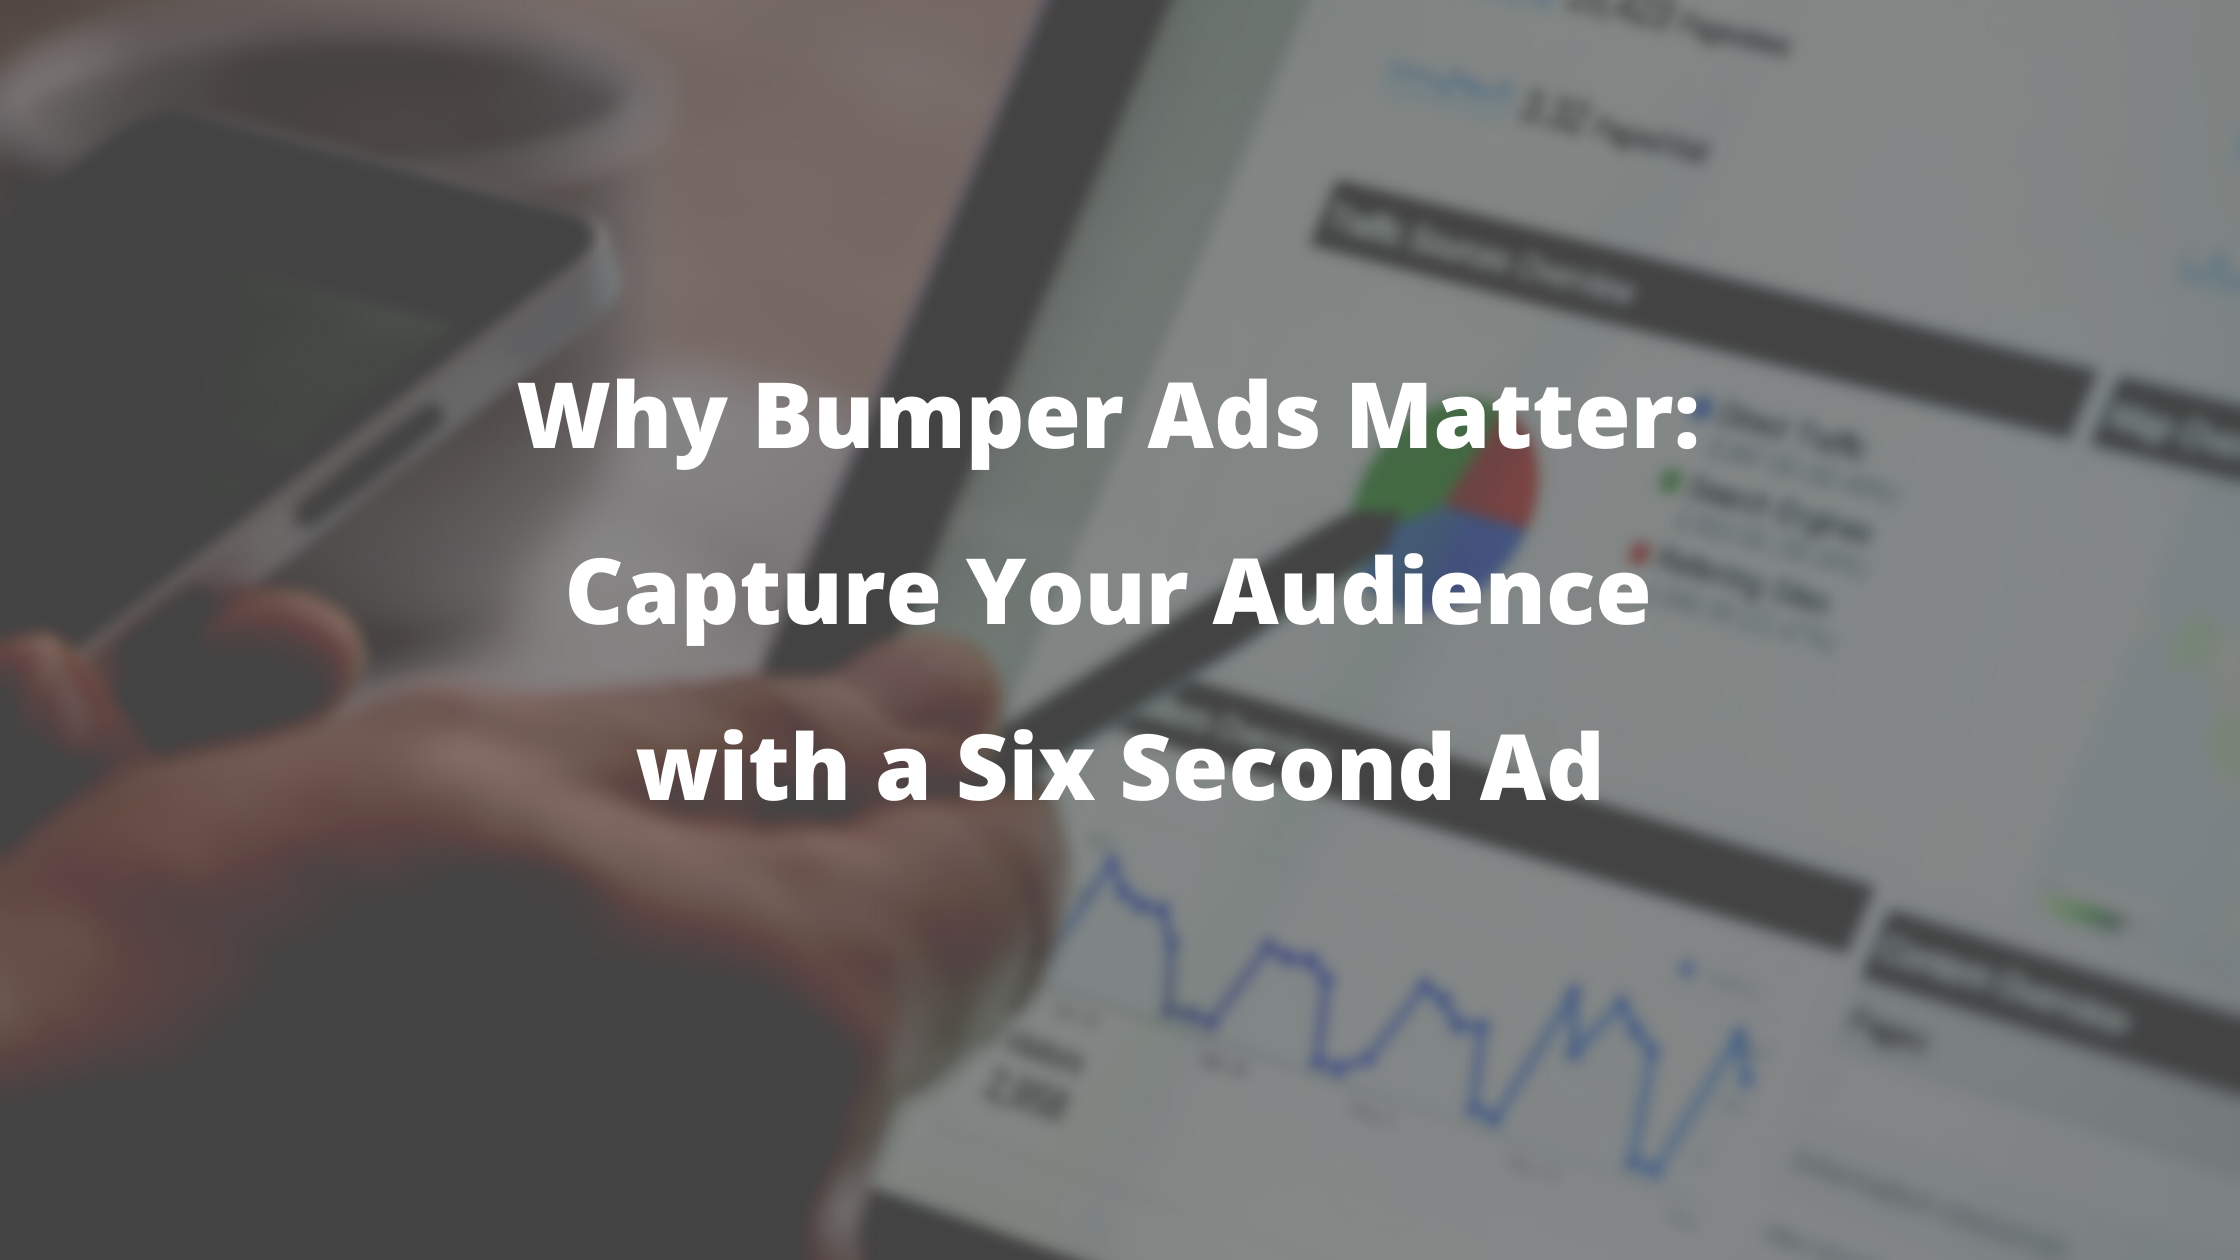 Why Bumper Ads Matter: Capture Your Audience with a Six Second Ad